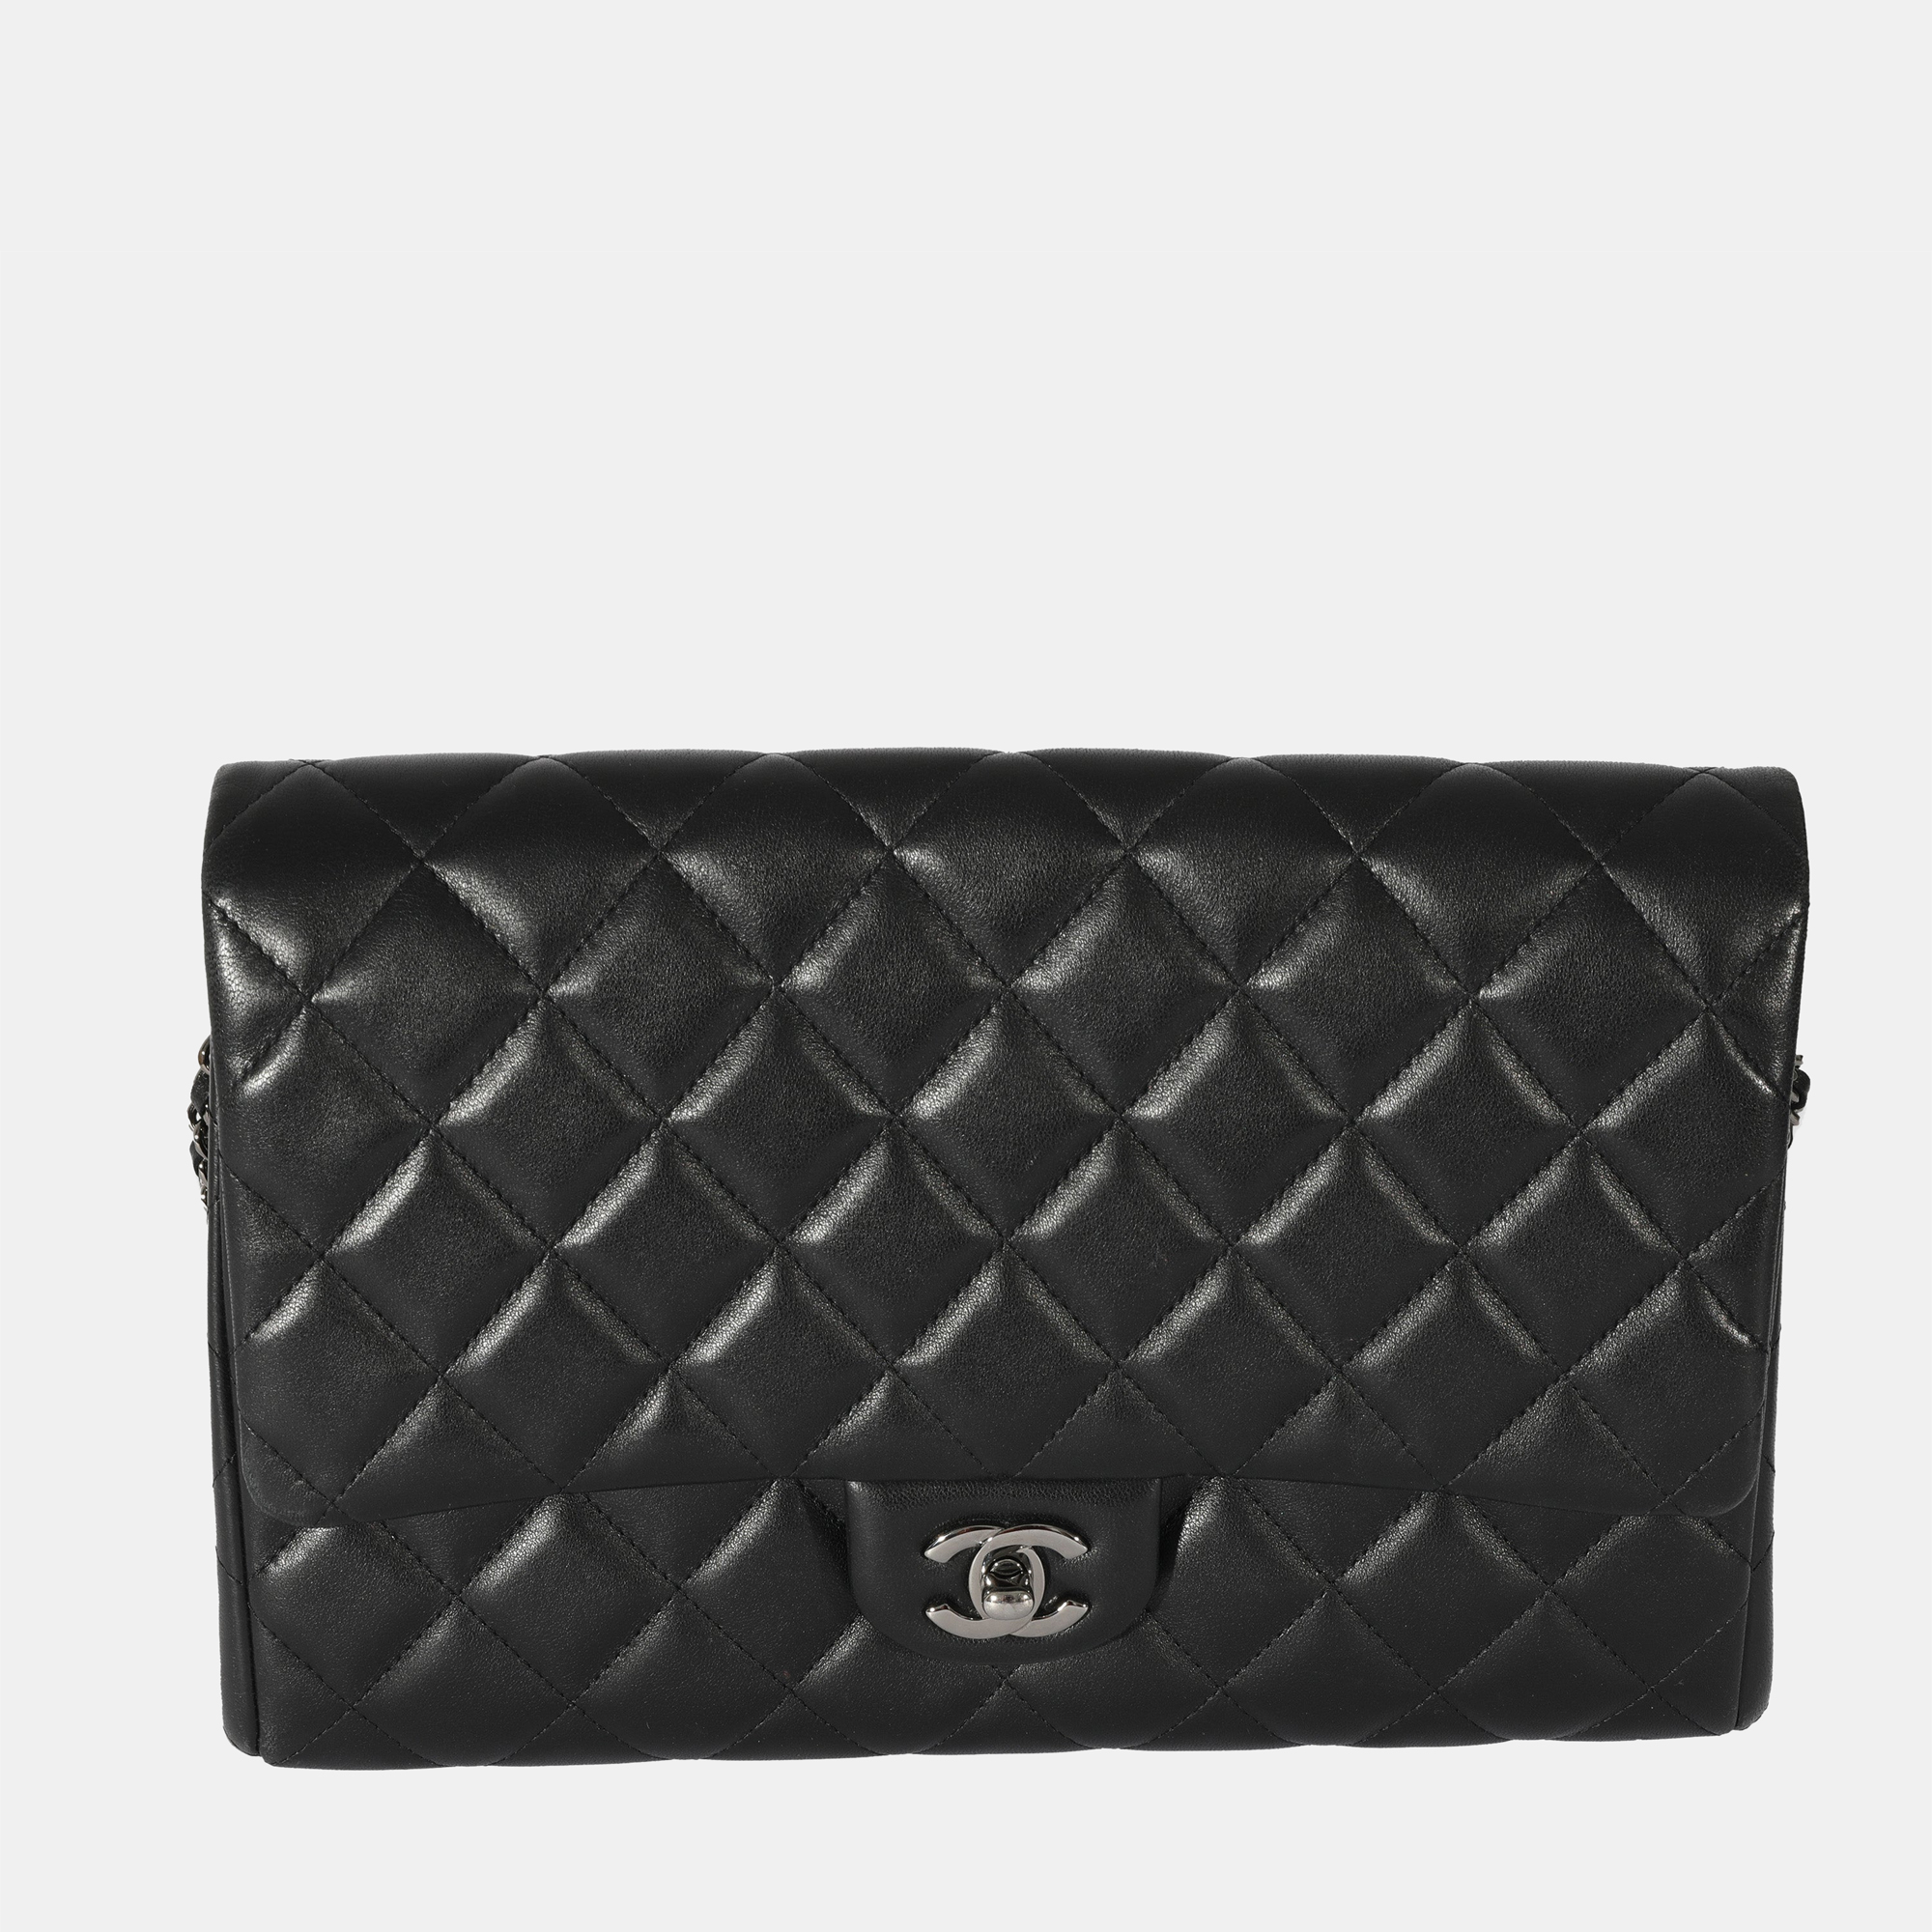 Pre-owned Chanel Black Lambskin Leather Cc Flap 2014 Clutch Bag